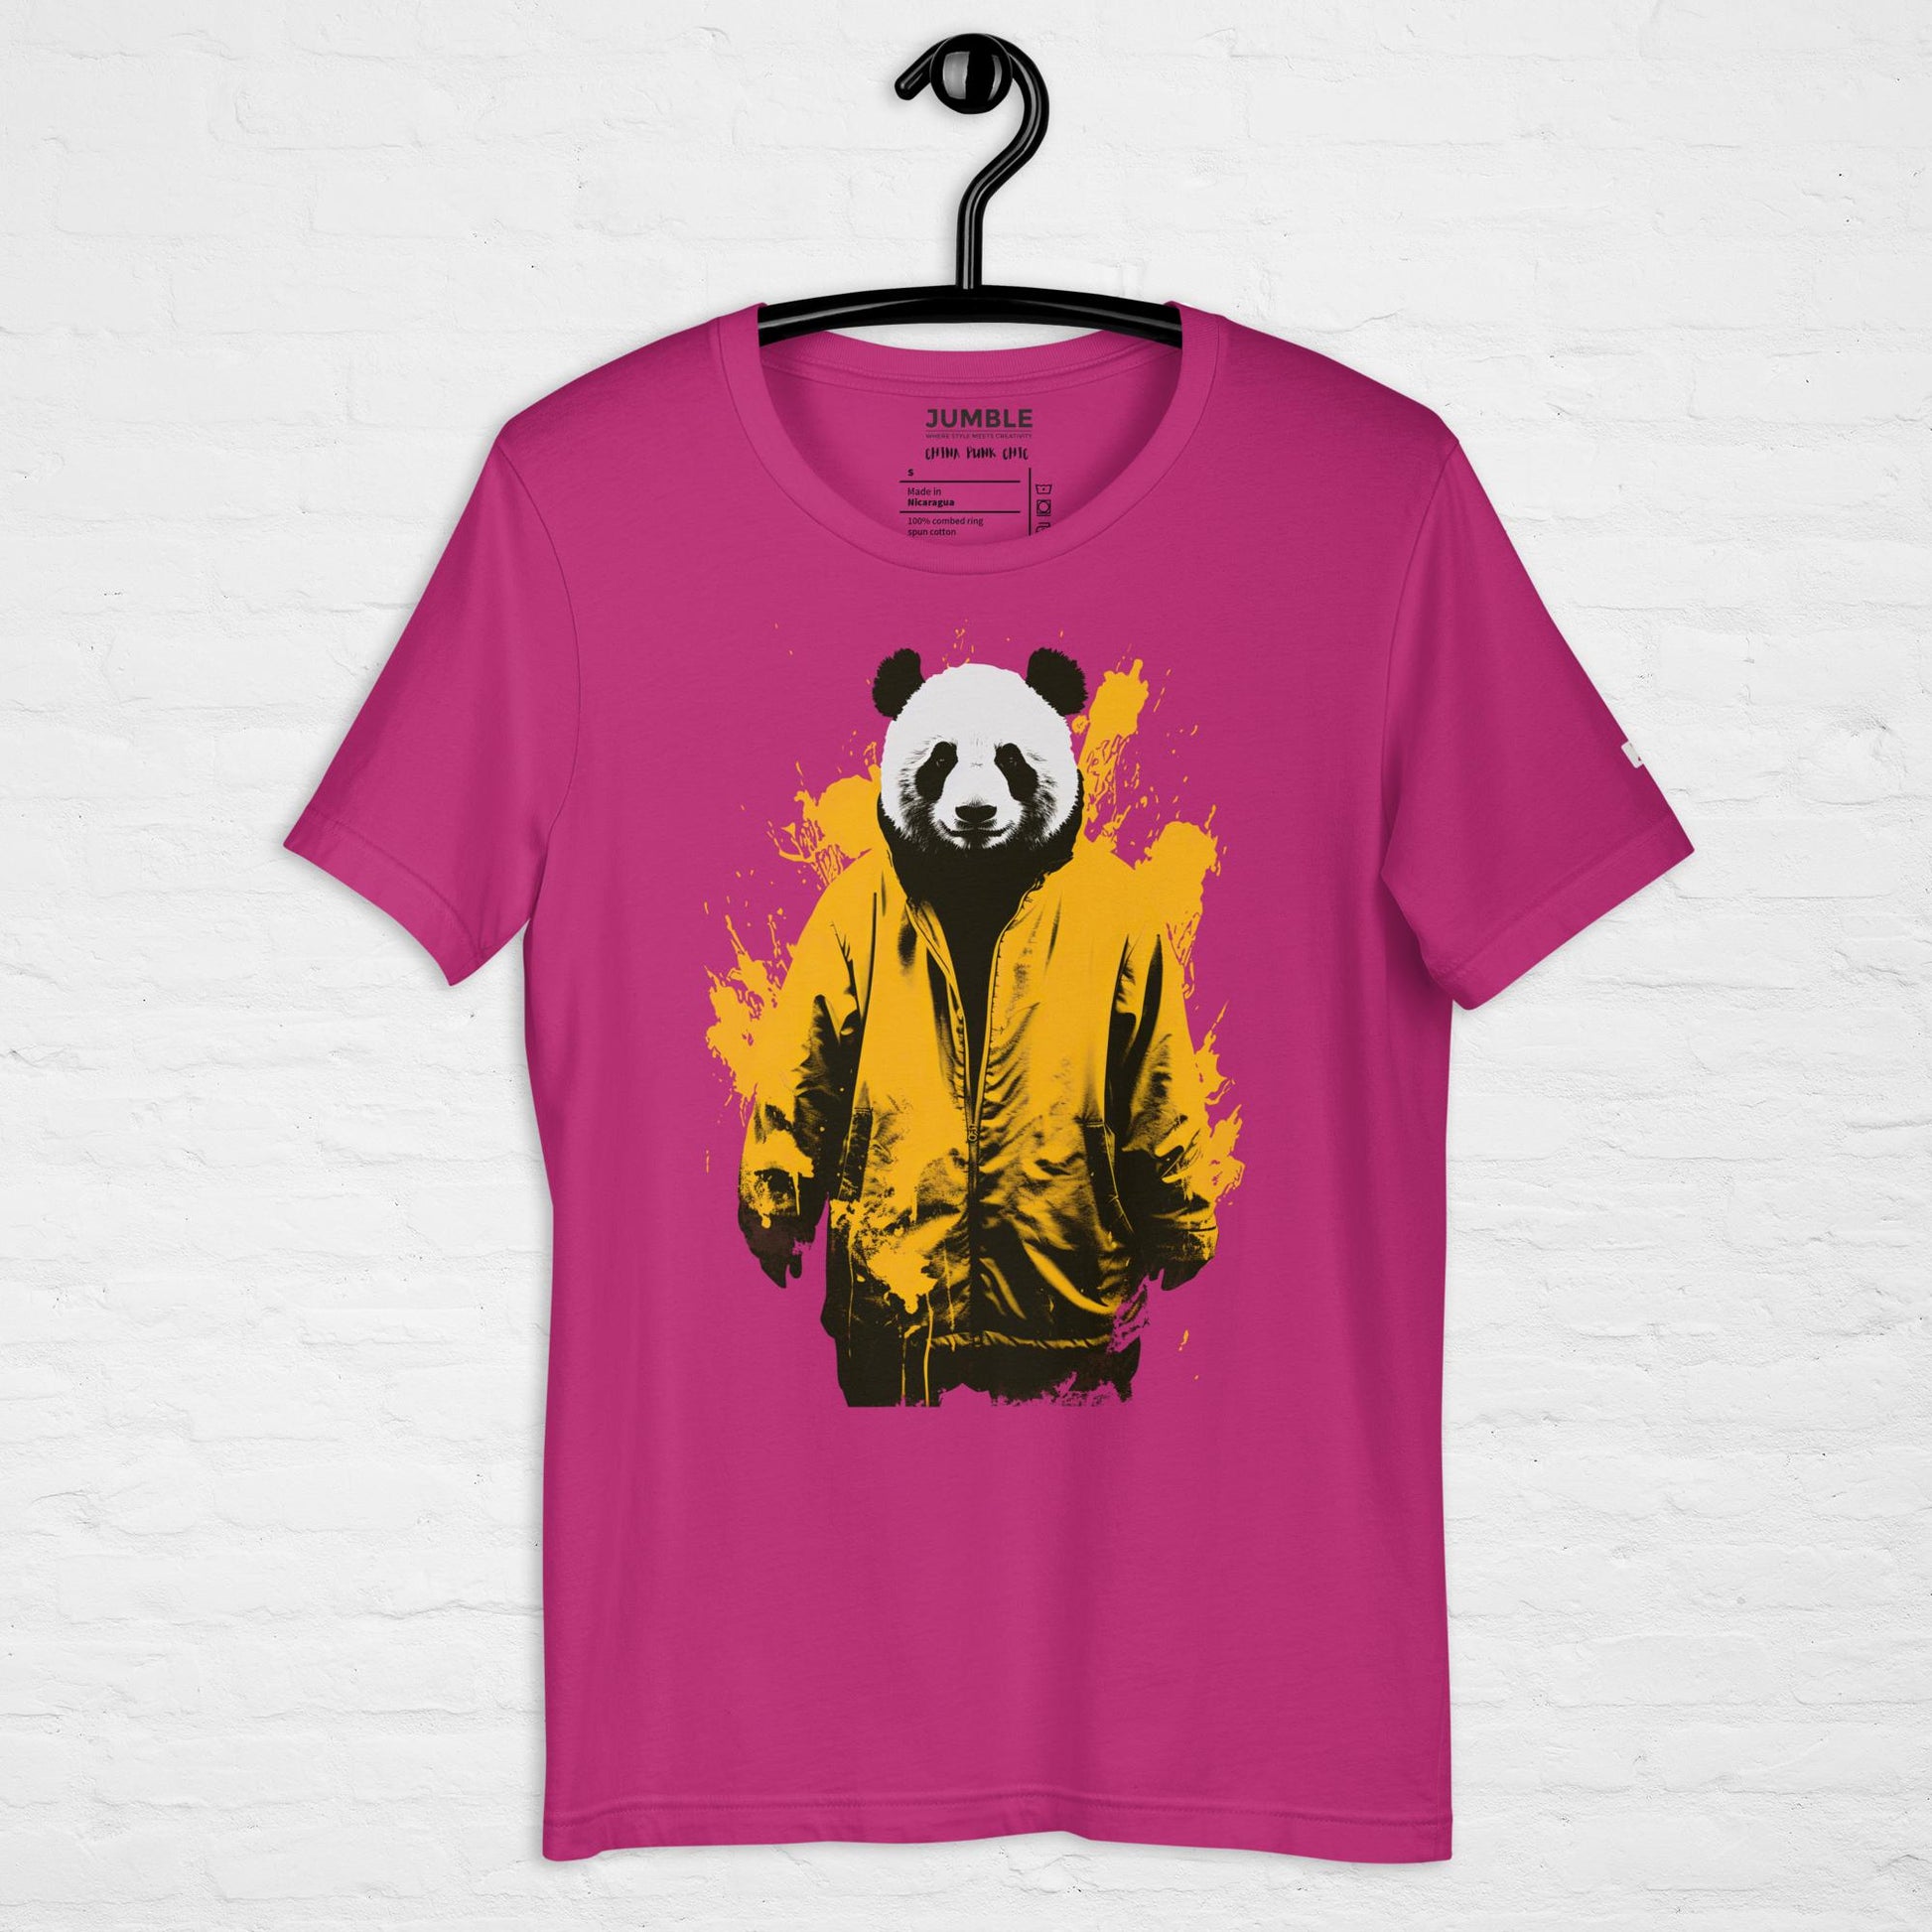 China Punk Chic Unisex t-shirt, in berry. Displayed on hanger